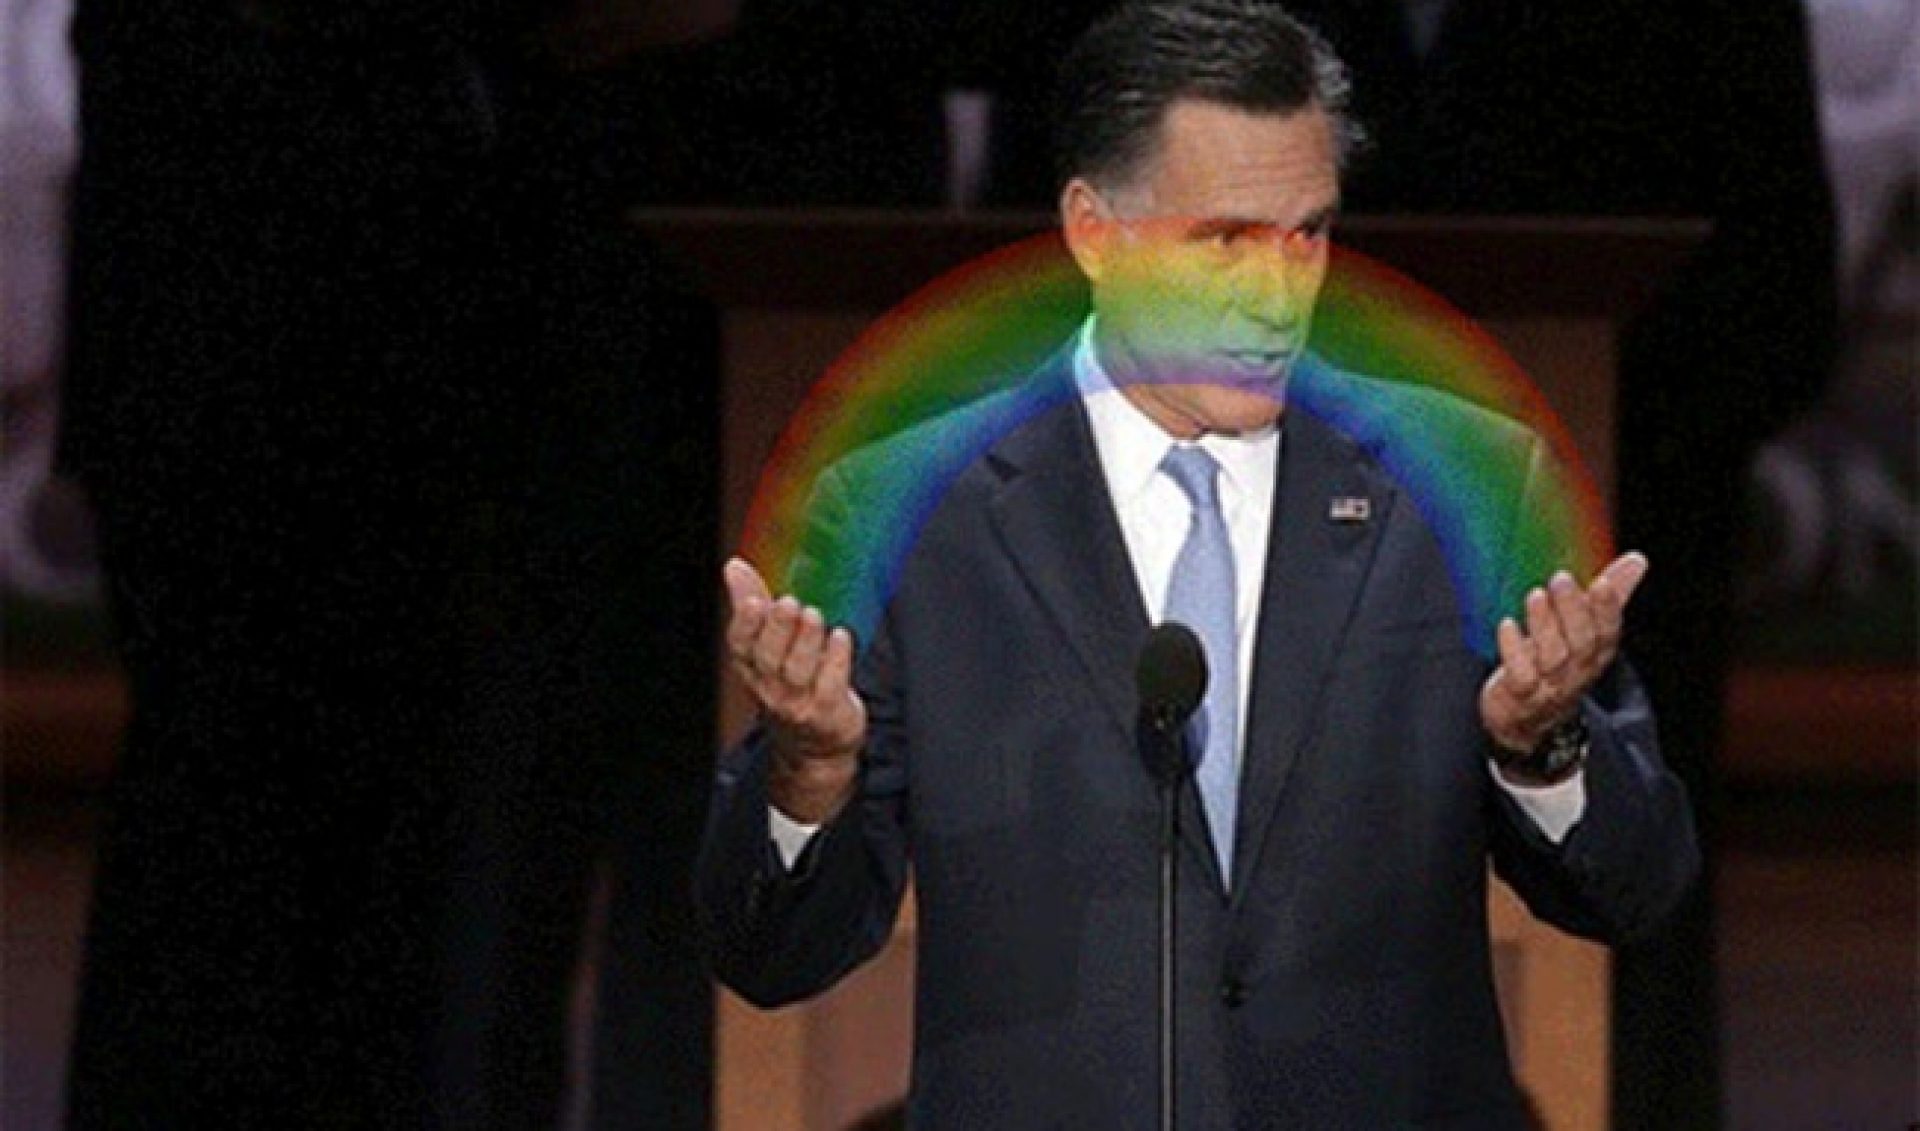 The Best Coverage Of Tonight’s Debate Might Be Tumblr’s Live GIFing